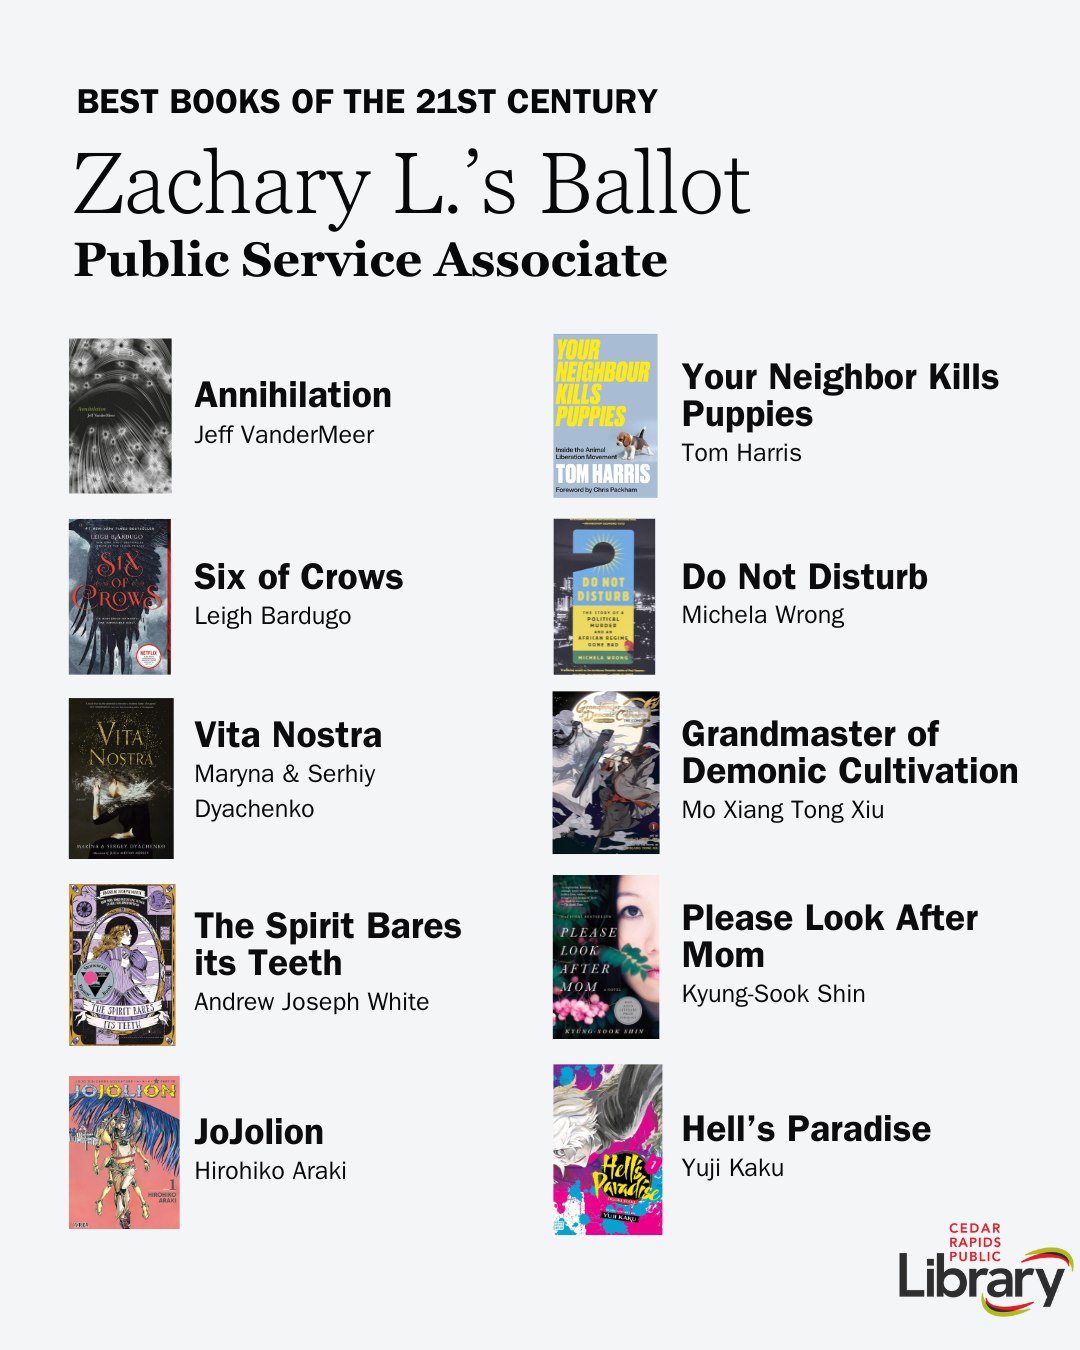 A graphic shows Public Service Associate Zachary's Ballot for Best Books of the 21st Century